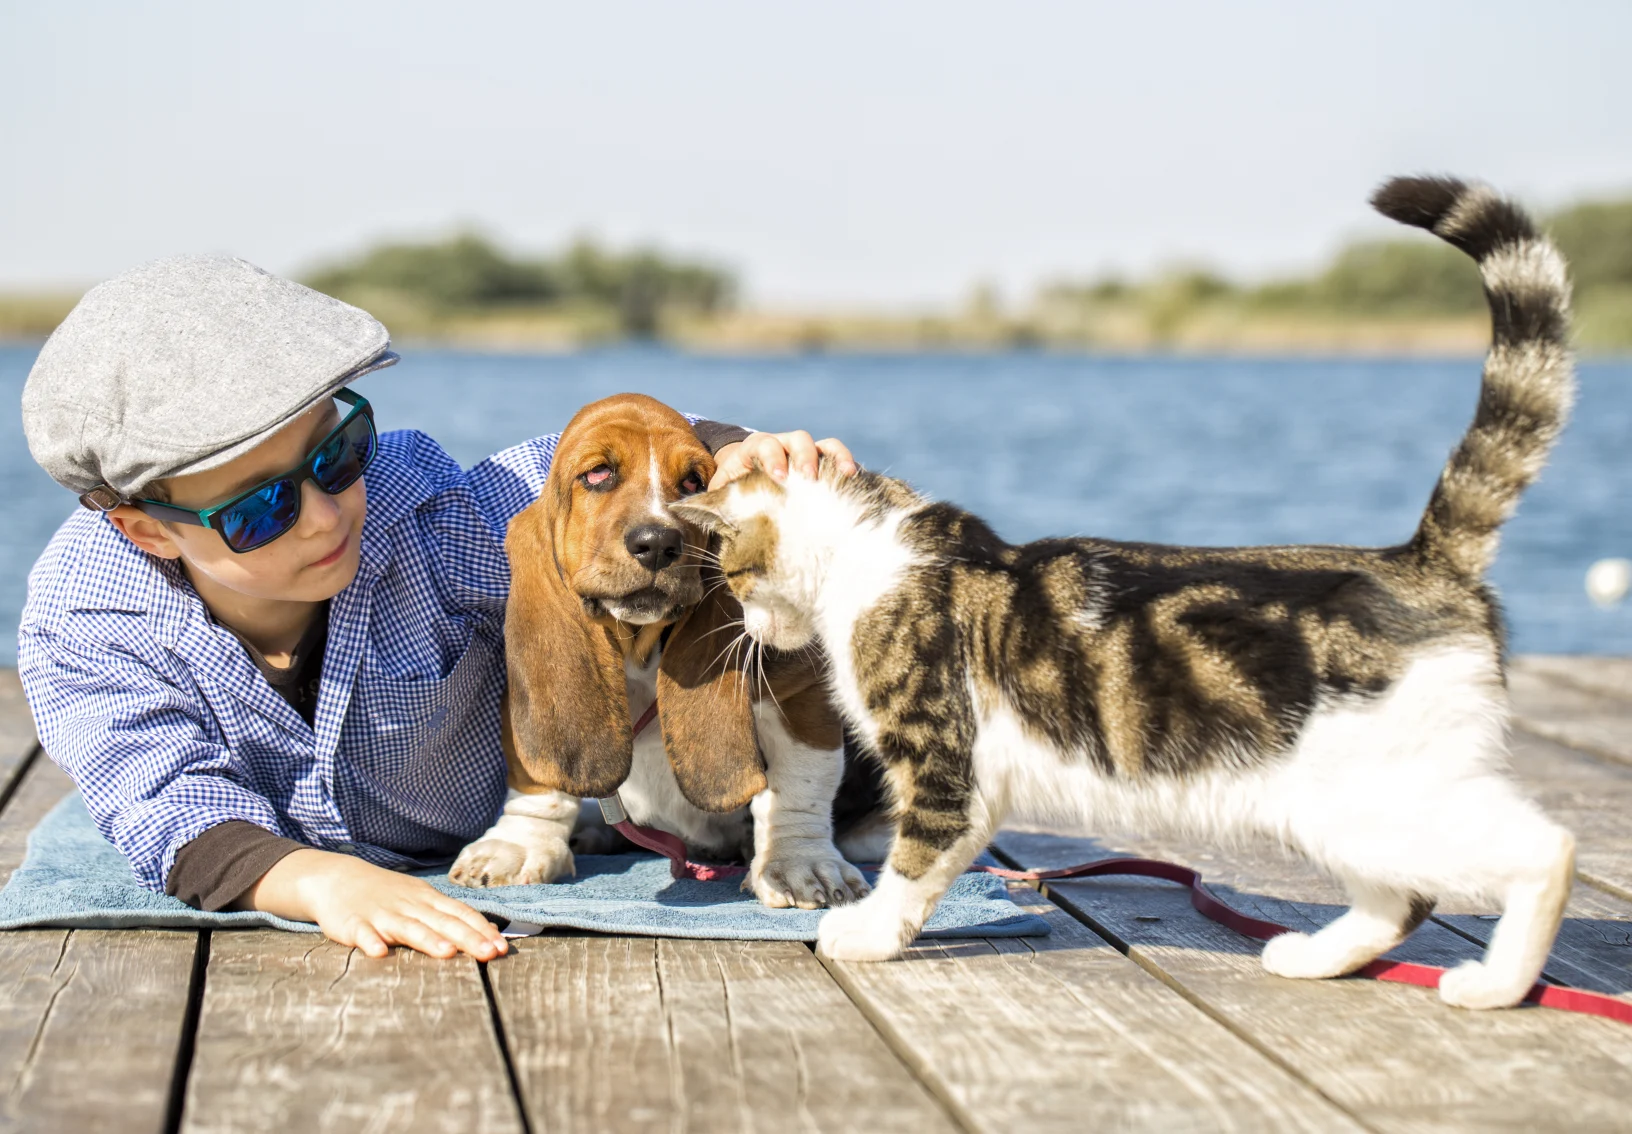 Cat and dog on a dock with a boy